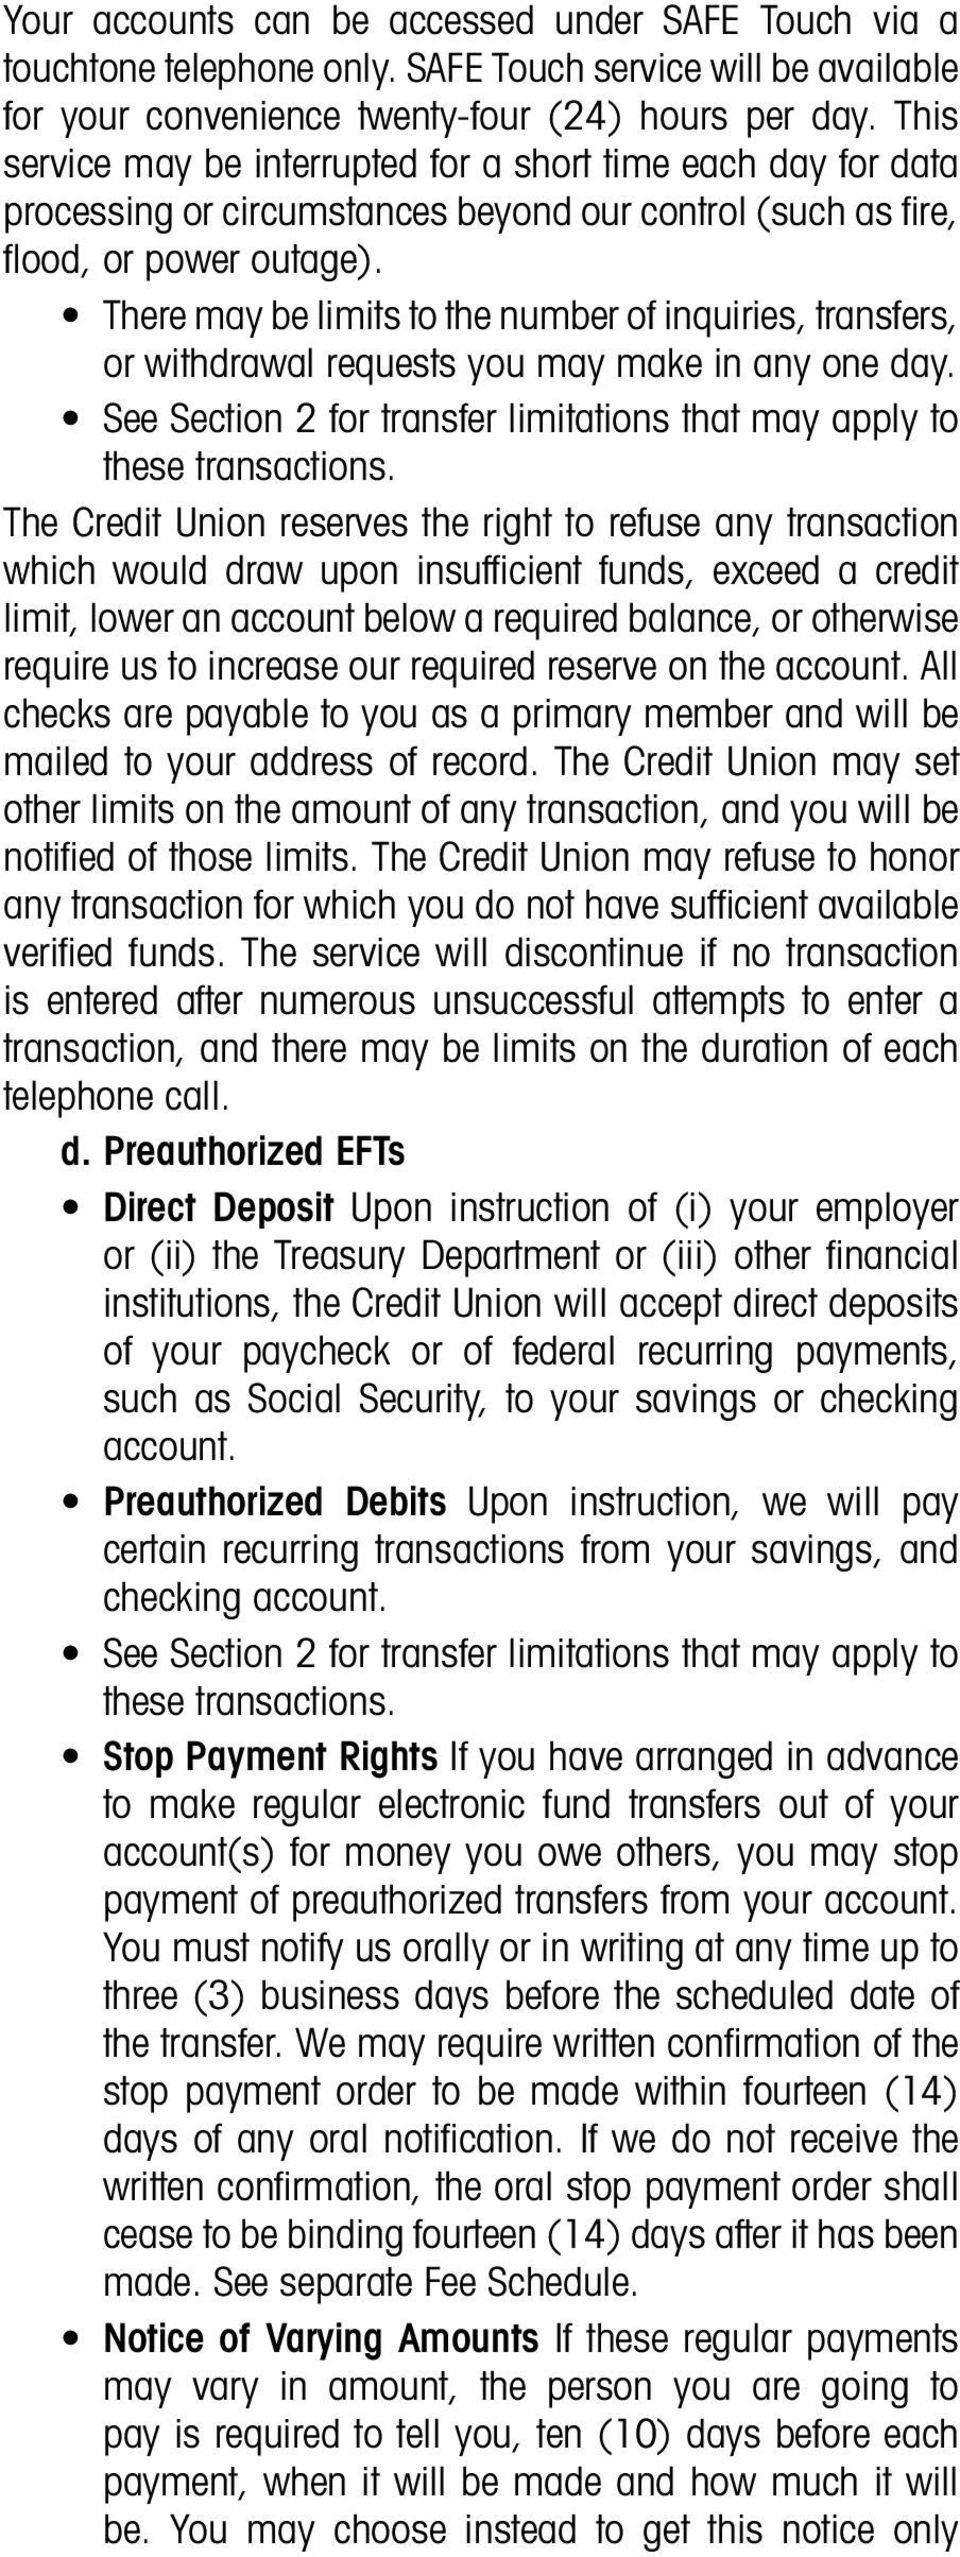 There may be limits to the number of inquiries, transfers, or withdrawal requests you may make in any one day. See Section 2 for transfer limitations that may apply to these transactions.